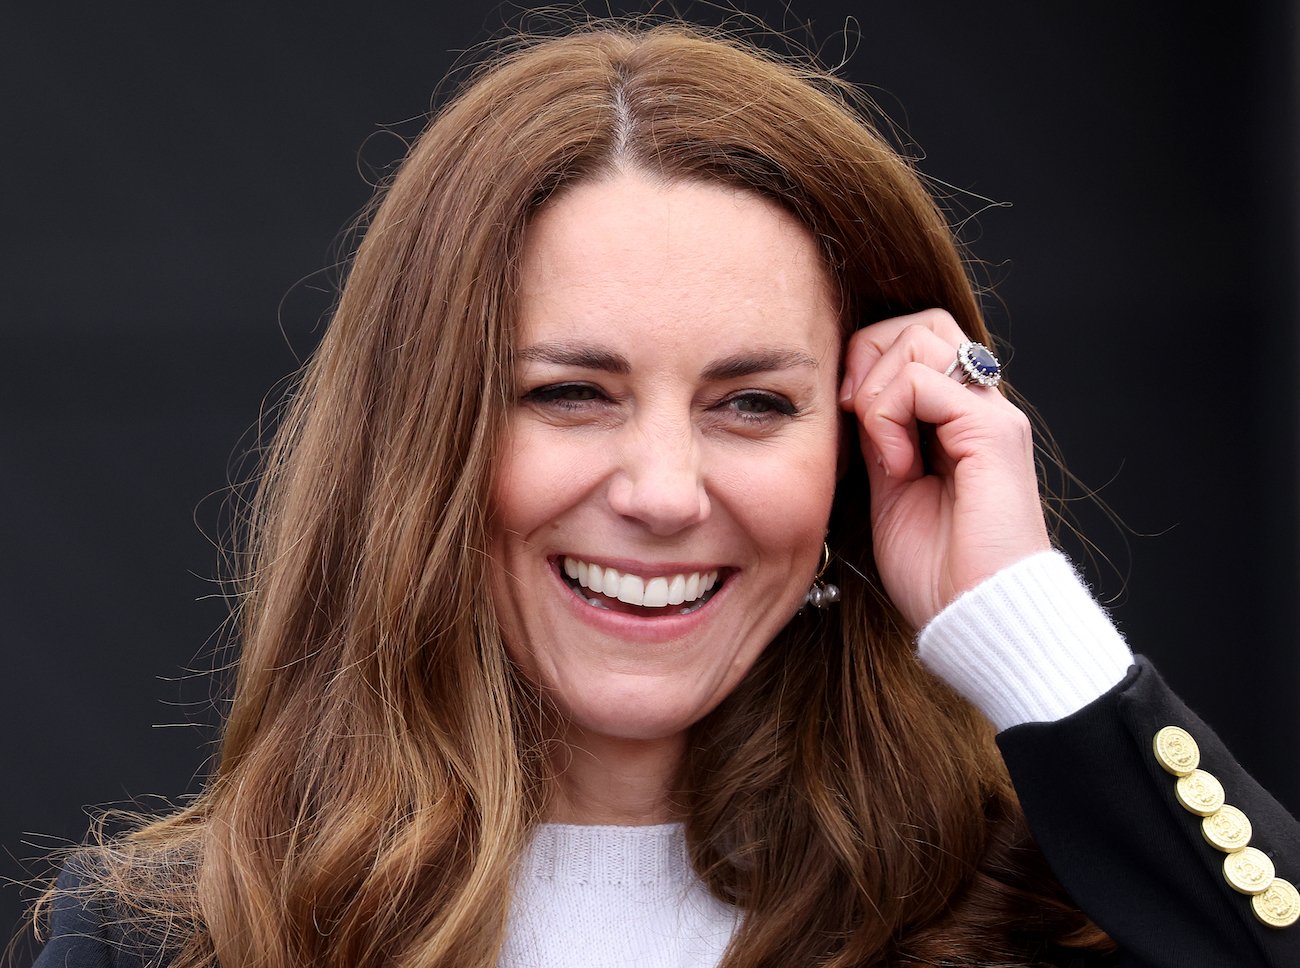 Kate Middleton smiling, one hand touching her hair